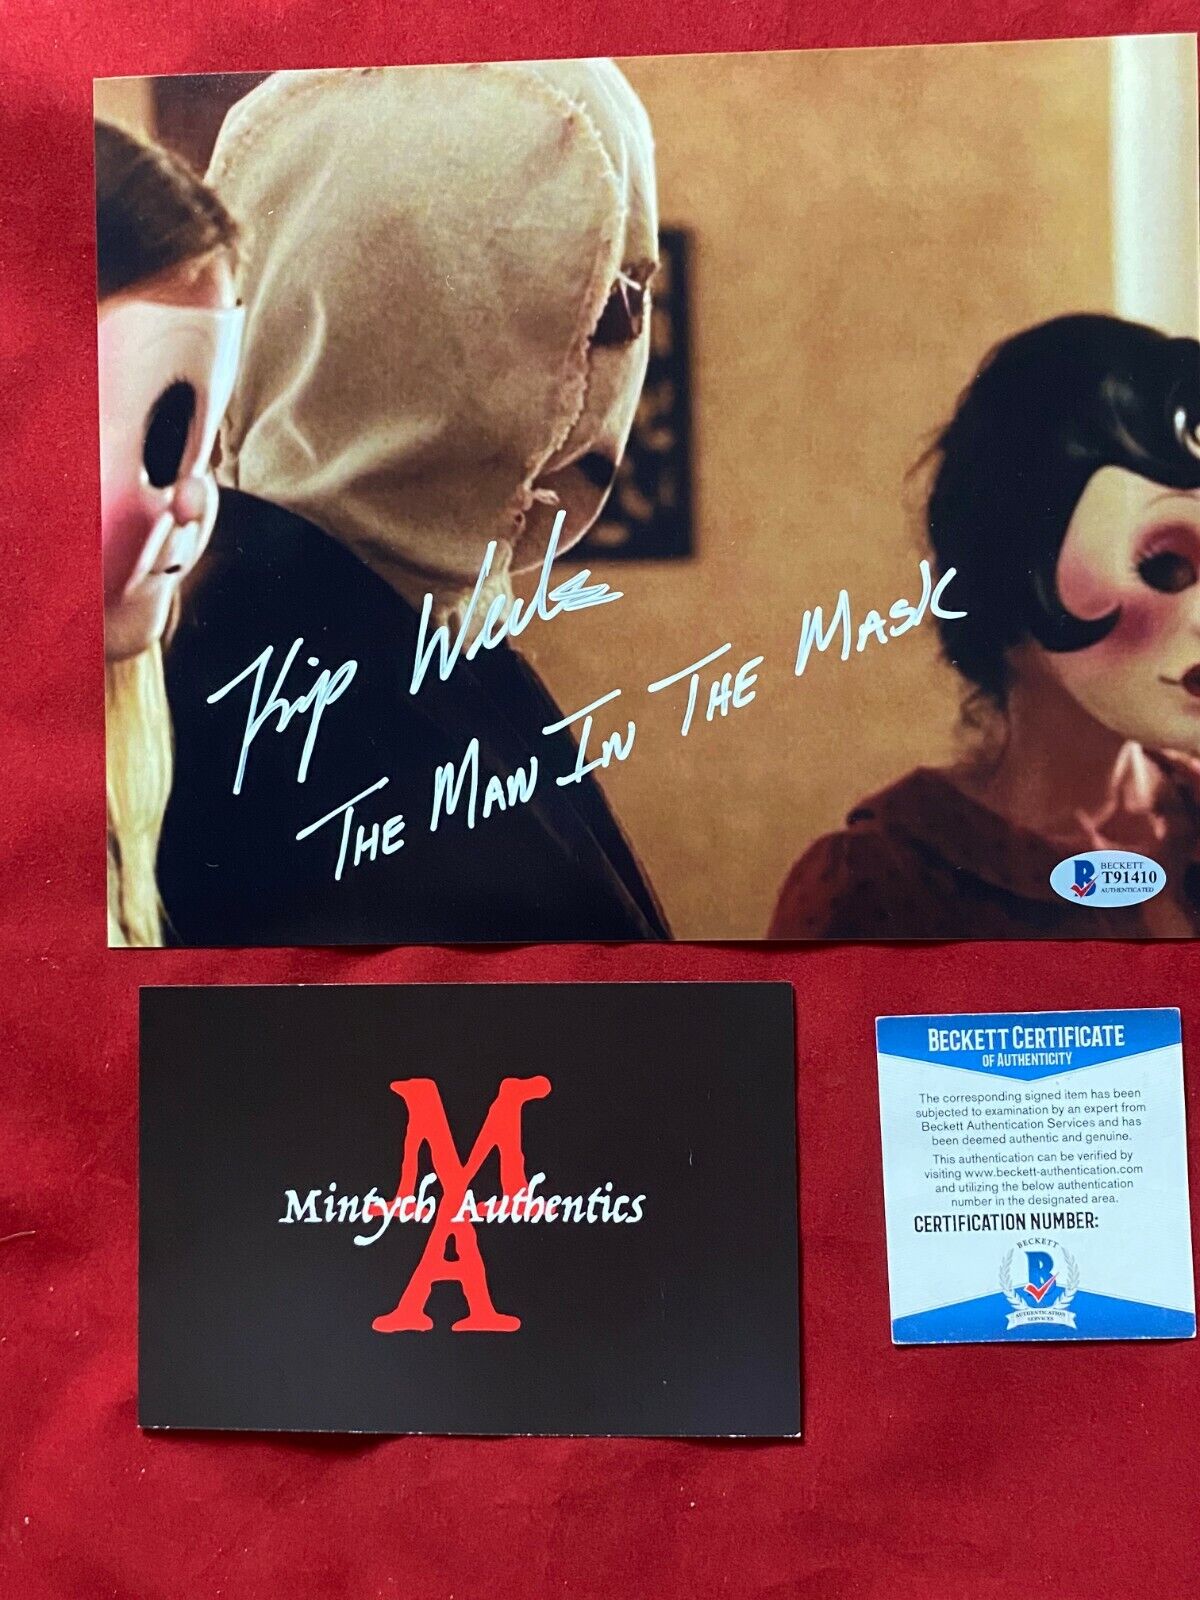 KIP WEEKS AUTOGRAPHED SIGNED 8X10 Photo Poster painting! THE STRANGERS! MAN IN THE MASK! BECKETT